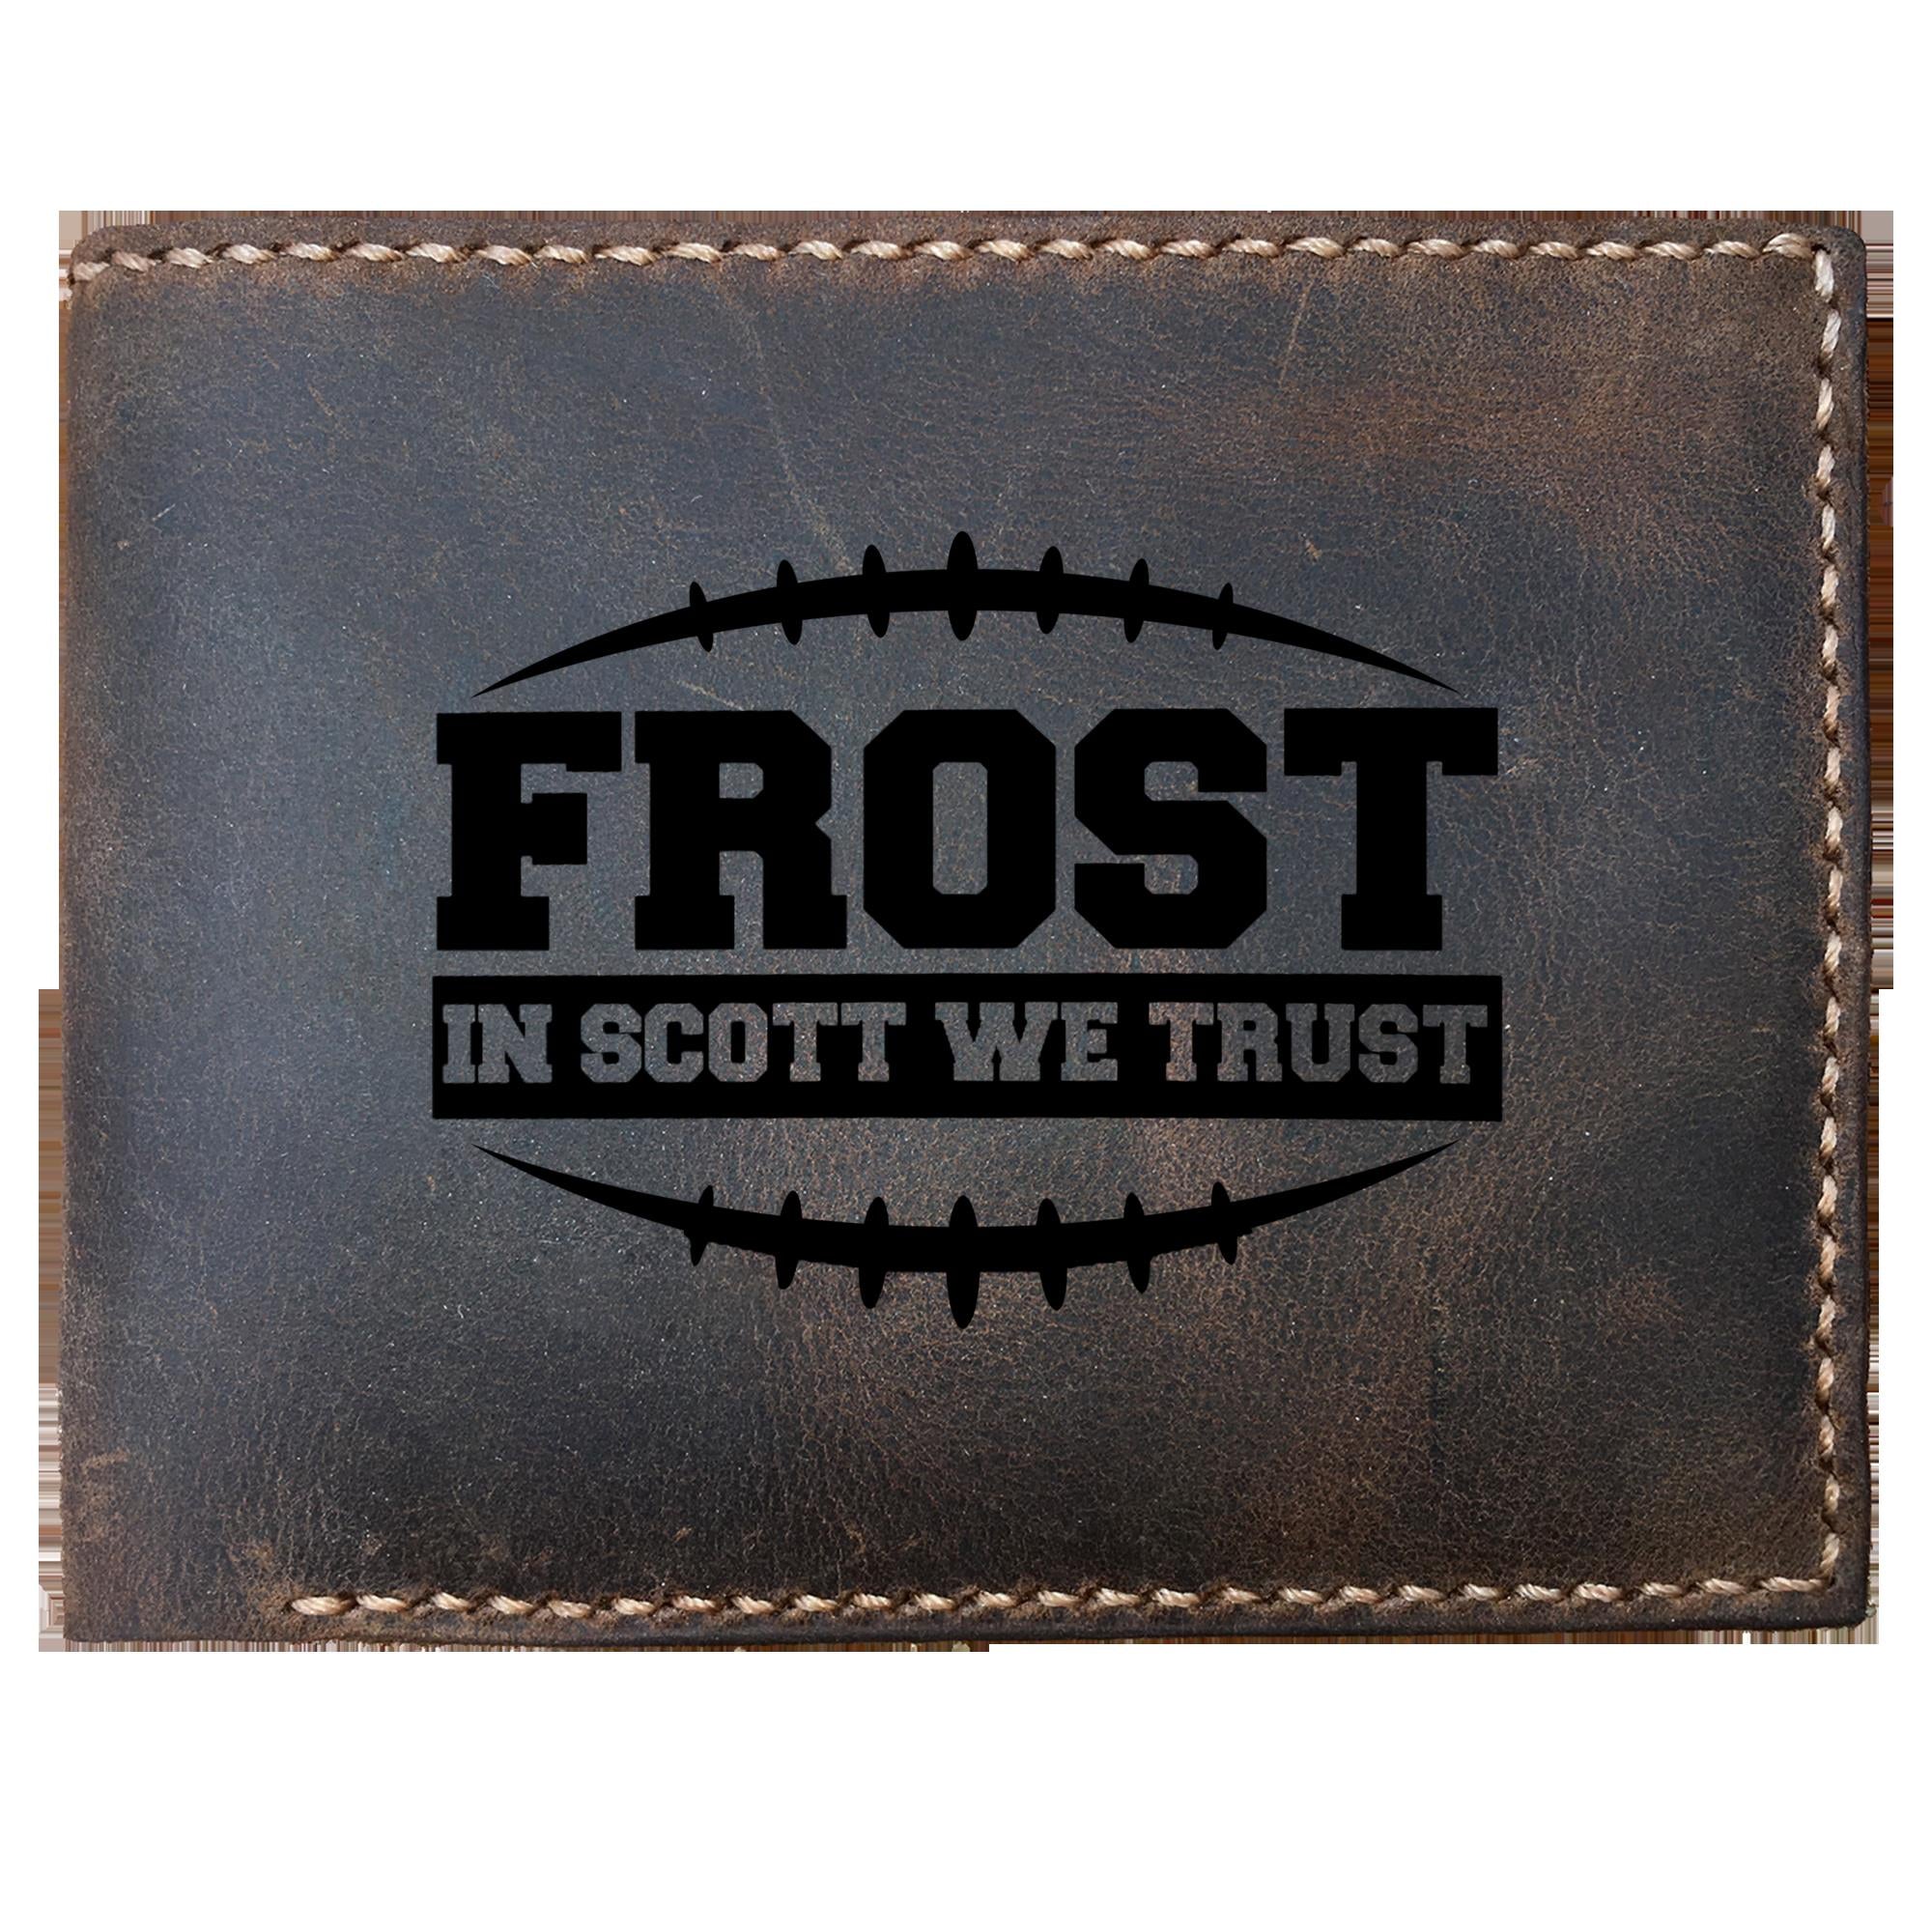 Skitongifts Funny Custom Laser Engraved Bifold Leather Wallet For Men, Frost 2018 In Scott We Trust